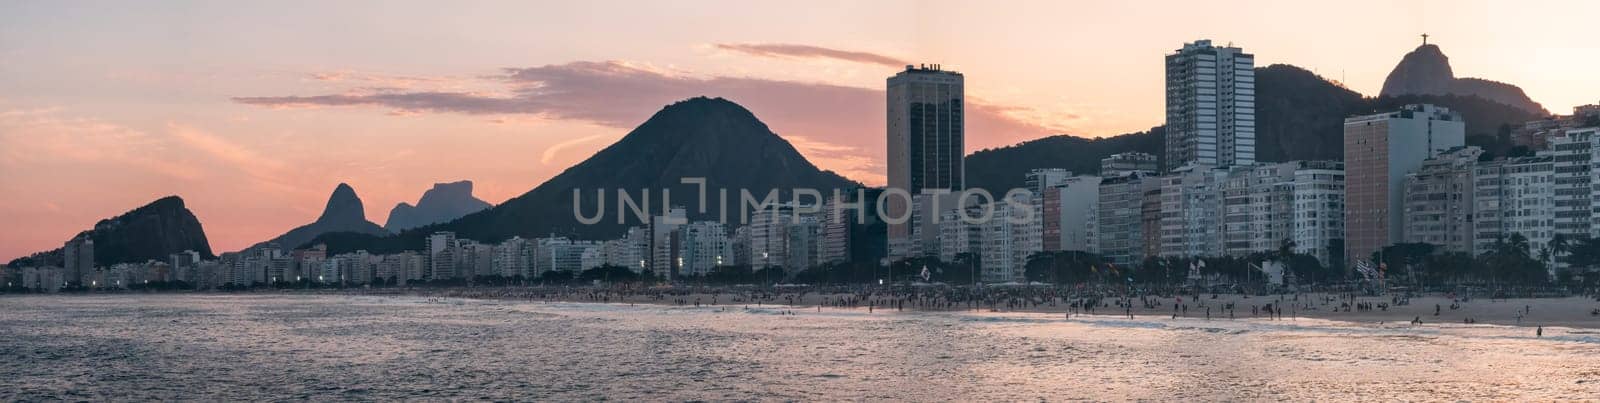 Dusk at Copacabana Beach with golden hues, Christ the Redeemer and mountain silhouettes